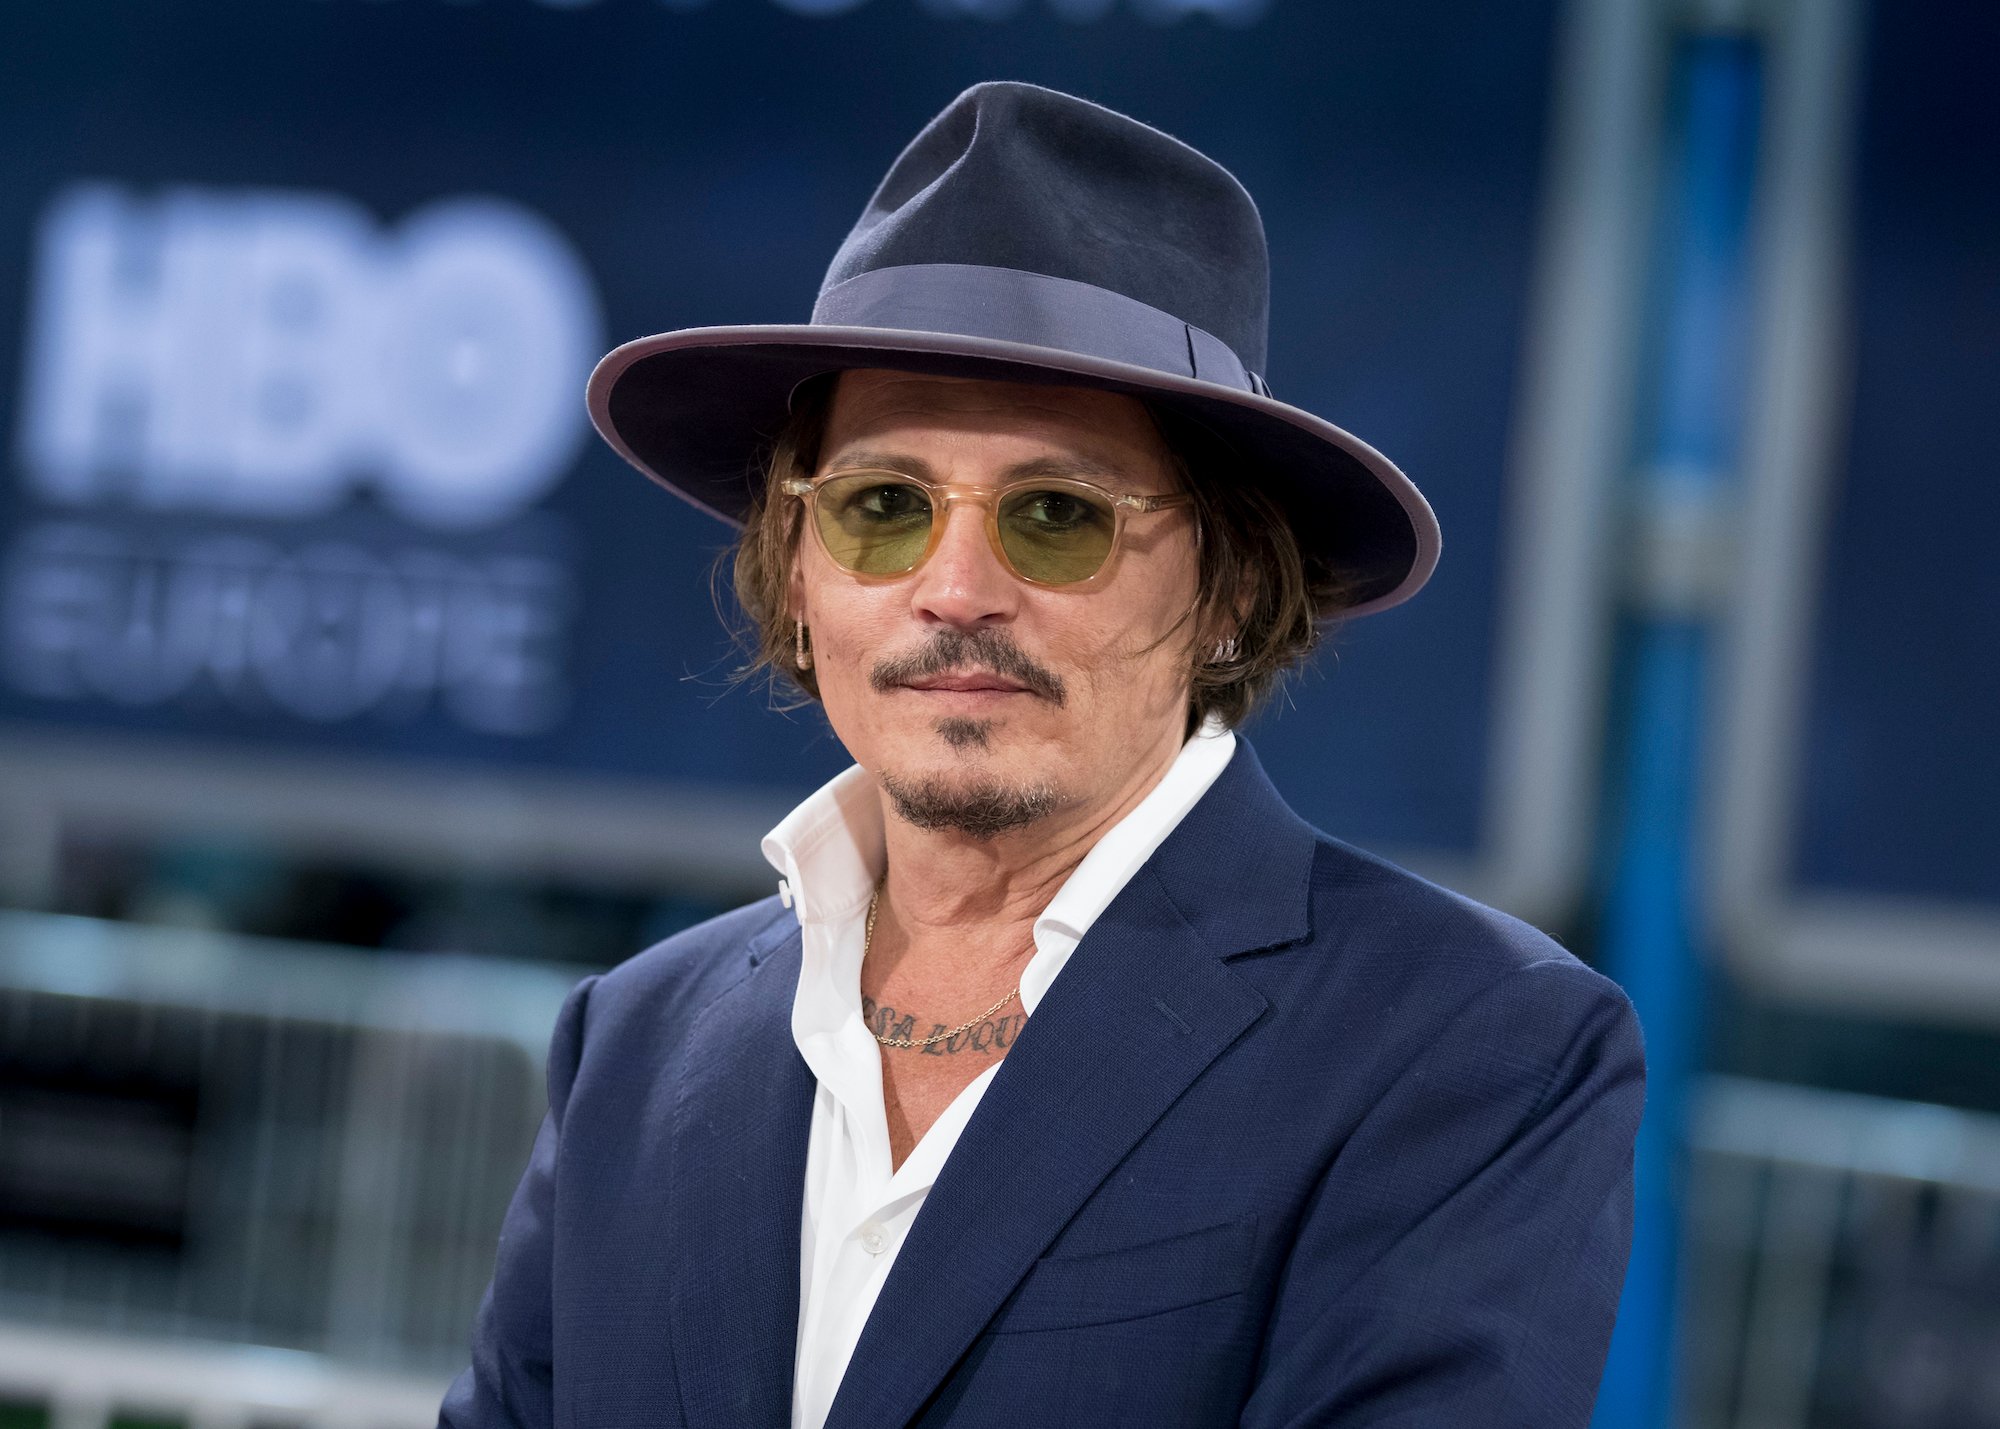 Johnny Depp Dropped Out of High School at 15 to Become a Rockstar